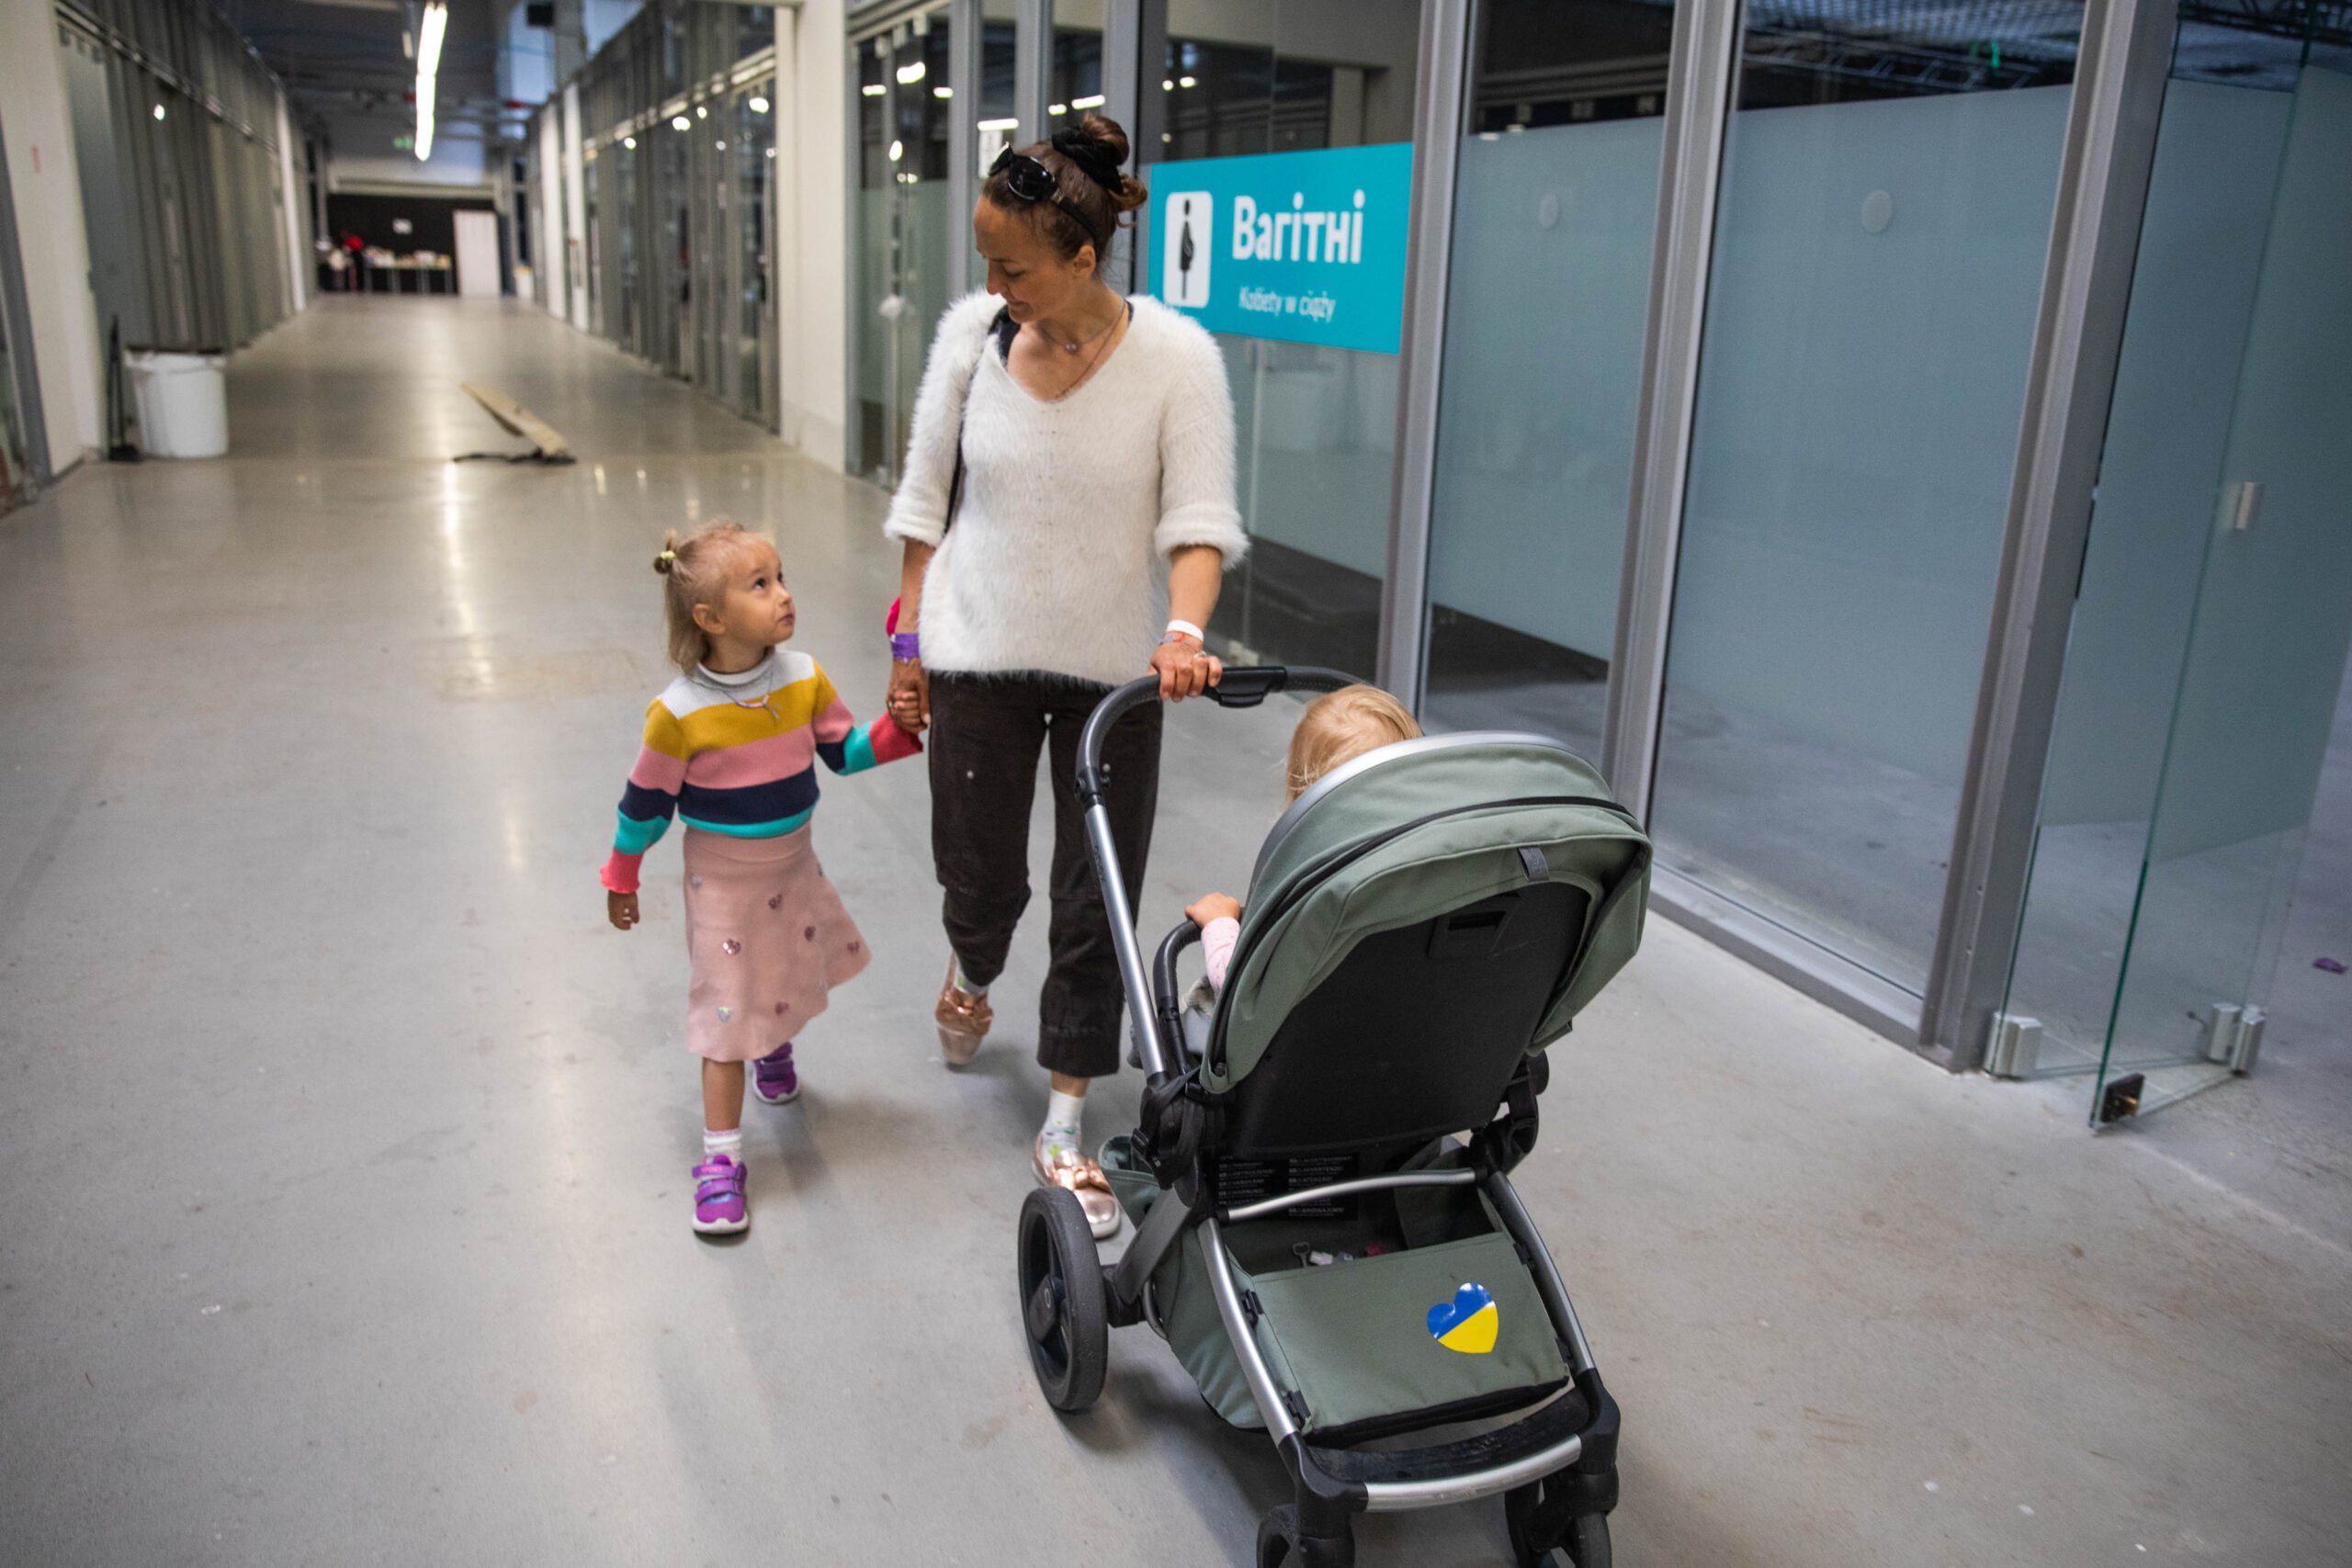 Mariia Radionova and her daughters Lada and Rada walk through a hallway in a temporary housing center for refugees from Ukraine in Ptak Warsaw Expo on May 26, 2022 in Nadaryzn, Poland.